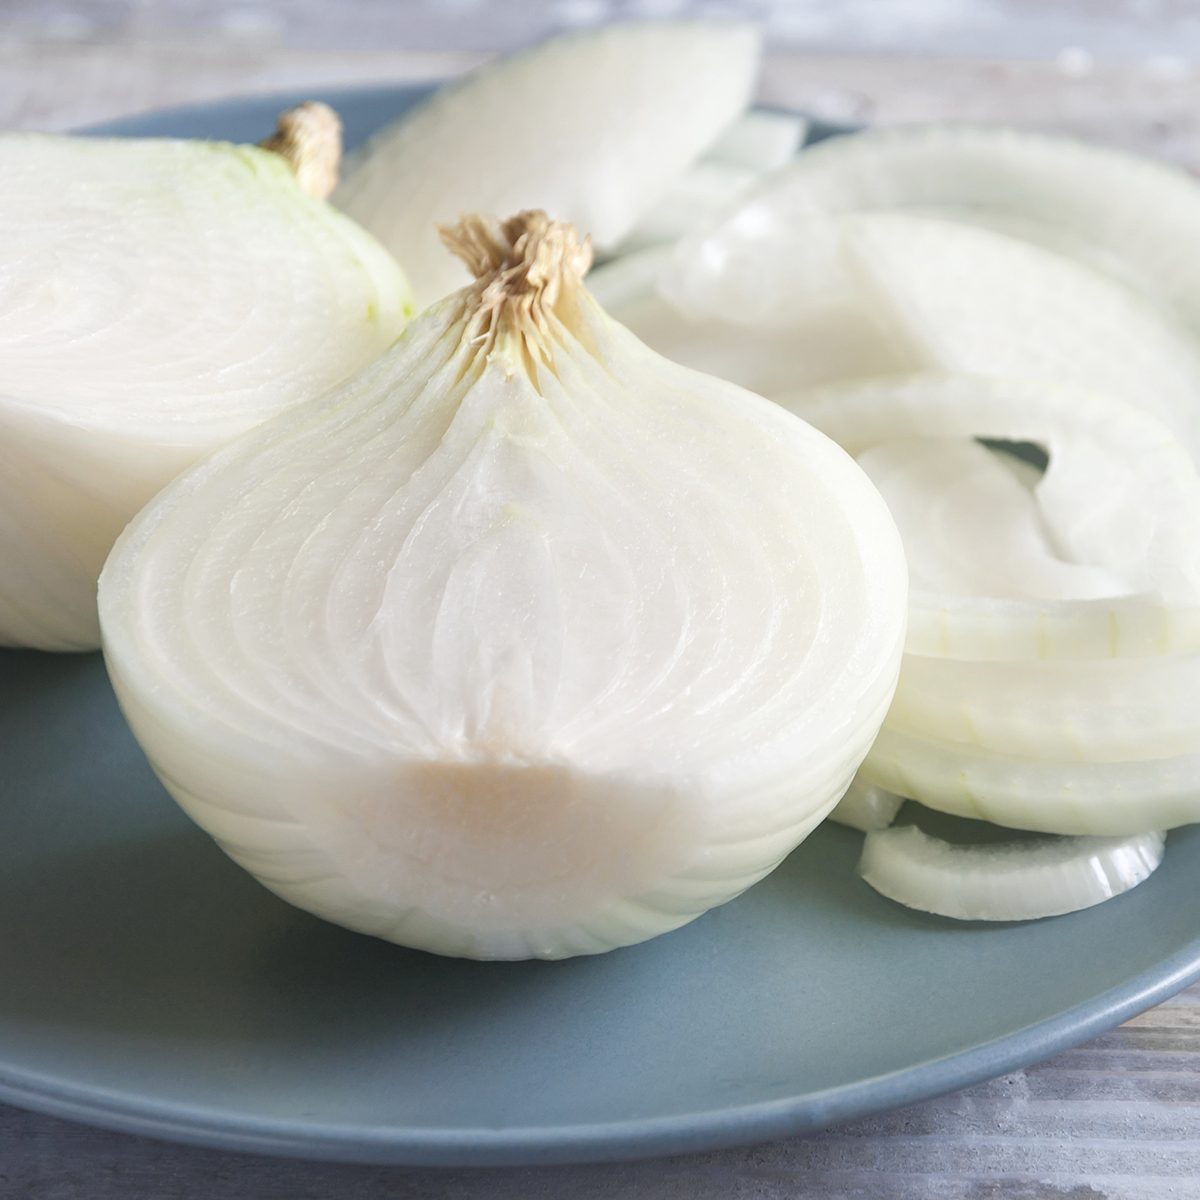 White onion on a wooden rustic table. Organic vegetables. Close-up of sliced raw organic white onion on a plate.; Shutterstock ID 681266095; Job (TFH, TOH, RD, BNB, CWM, CM): TOH